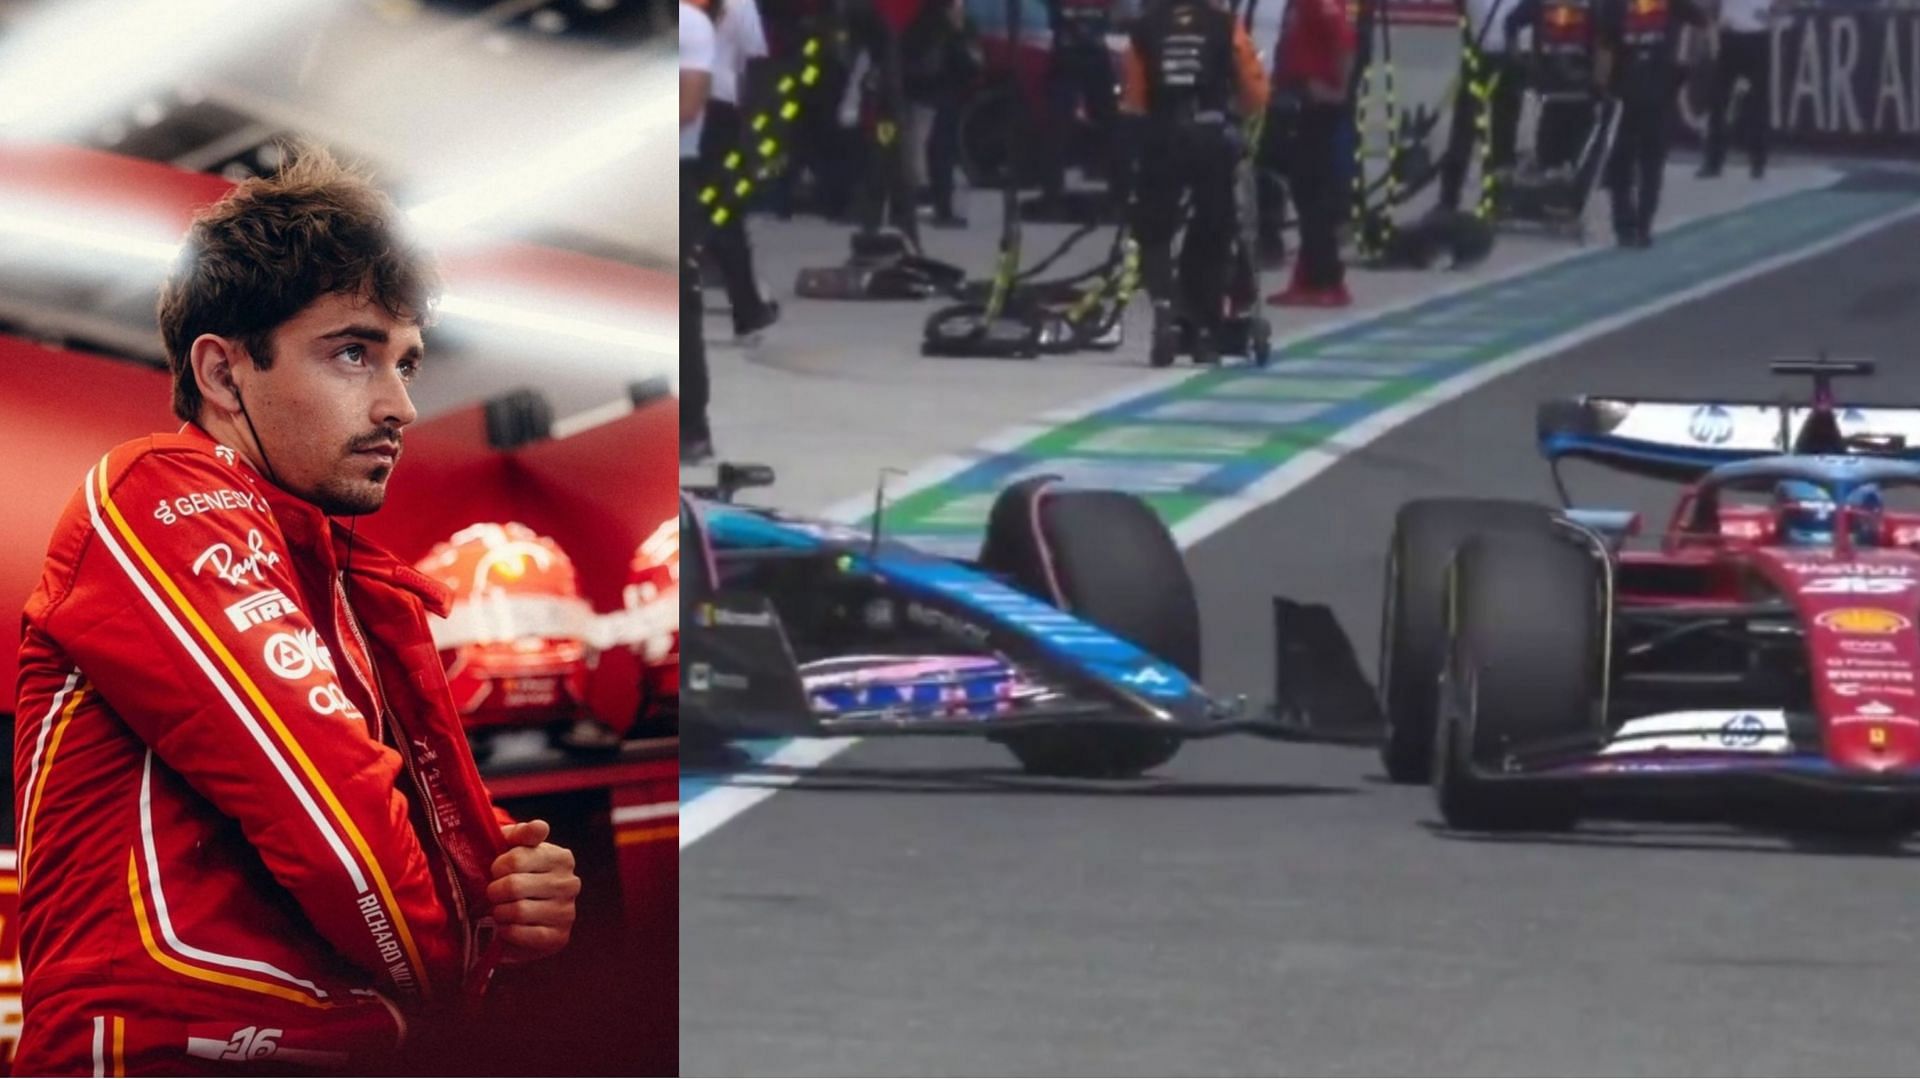 Esteban Icon makes contact with Charles Leclerc in the pit road during Miami Sprint race (Image from X)